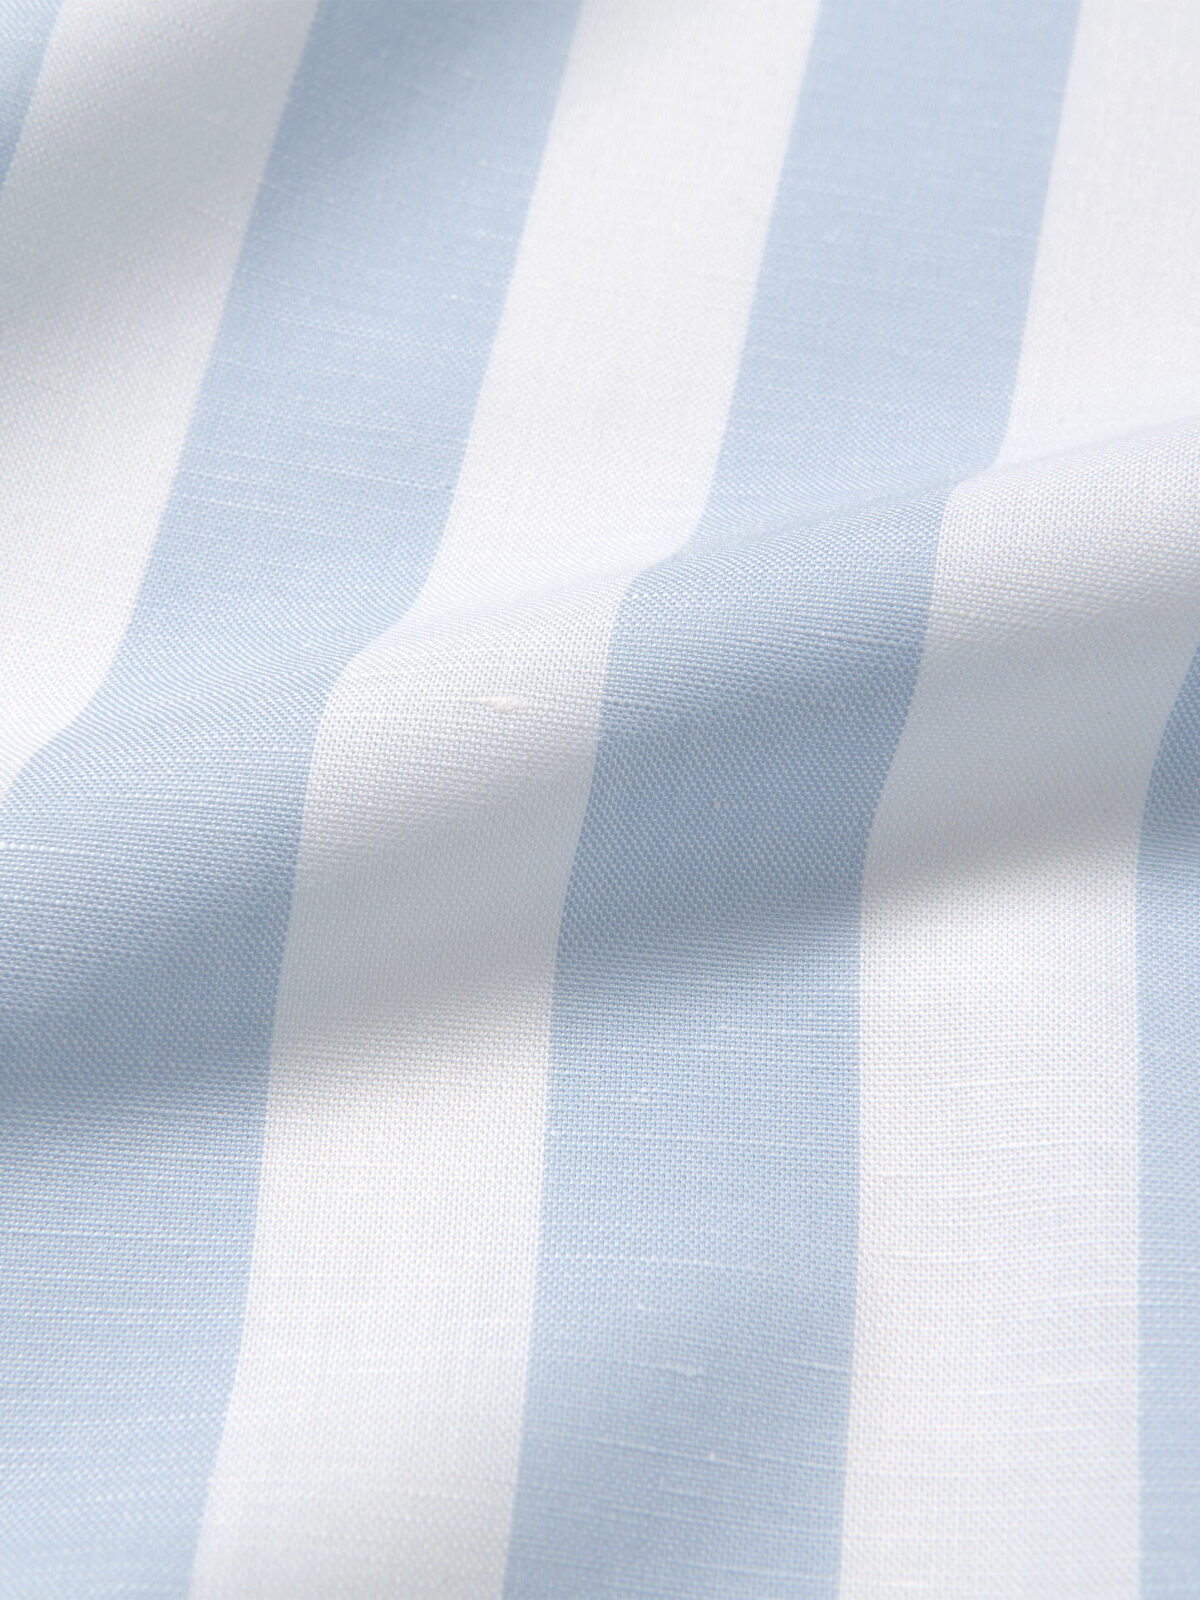 Pale Blue and White Stripe Fabric, Cotton Fabric